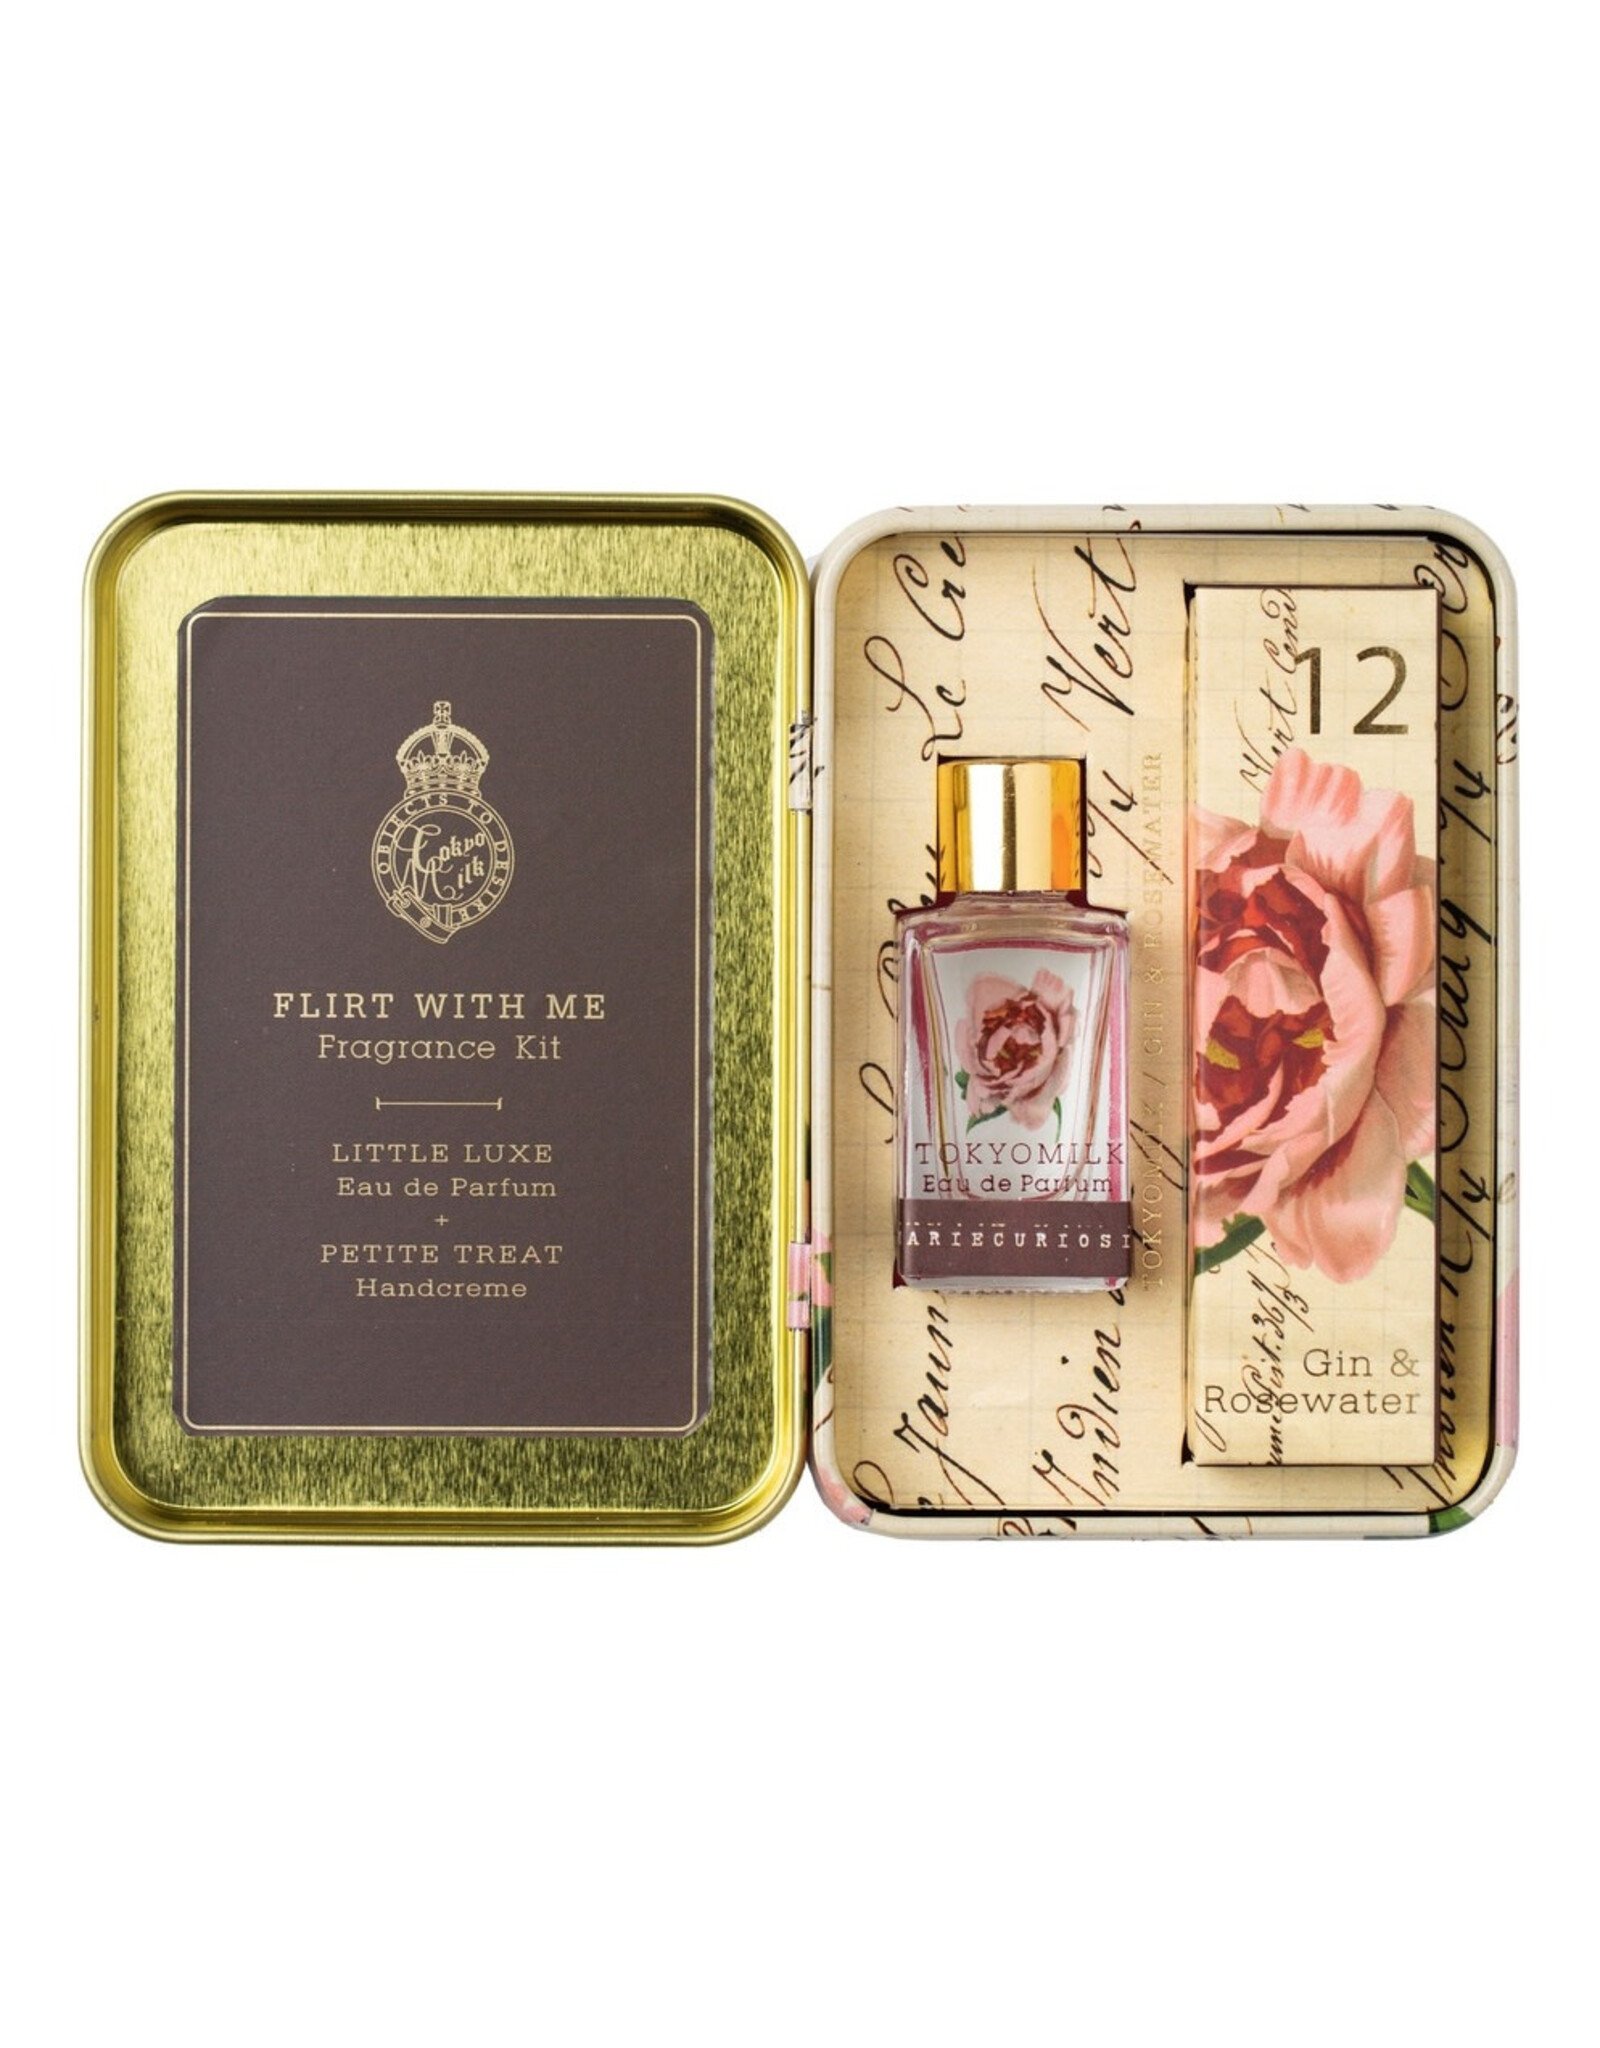 Gin & Rosewater Flirt with Me Kit